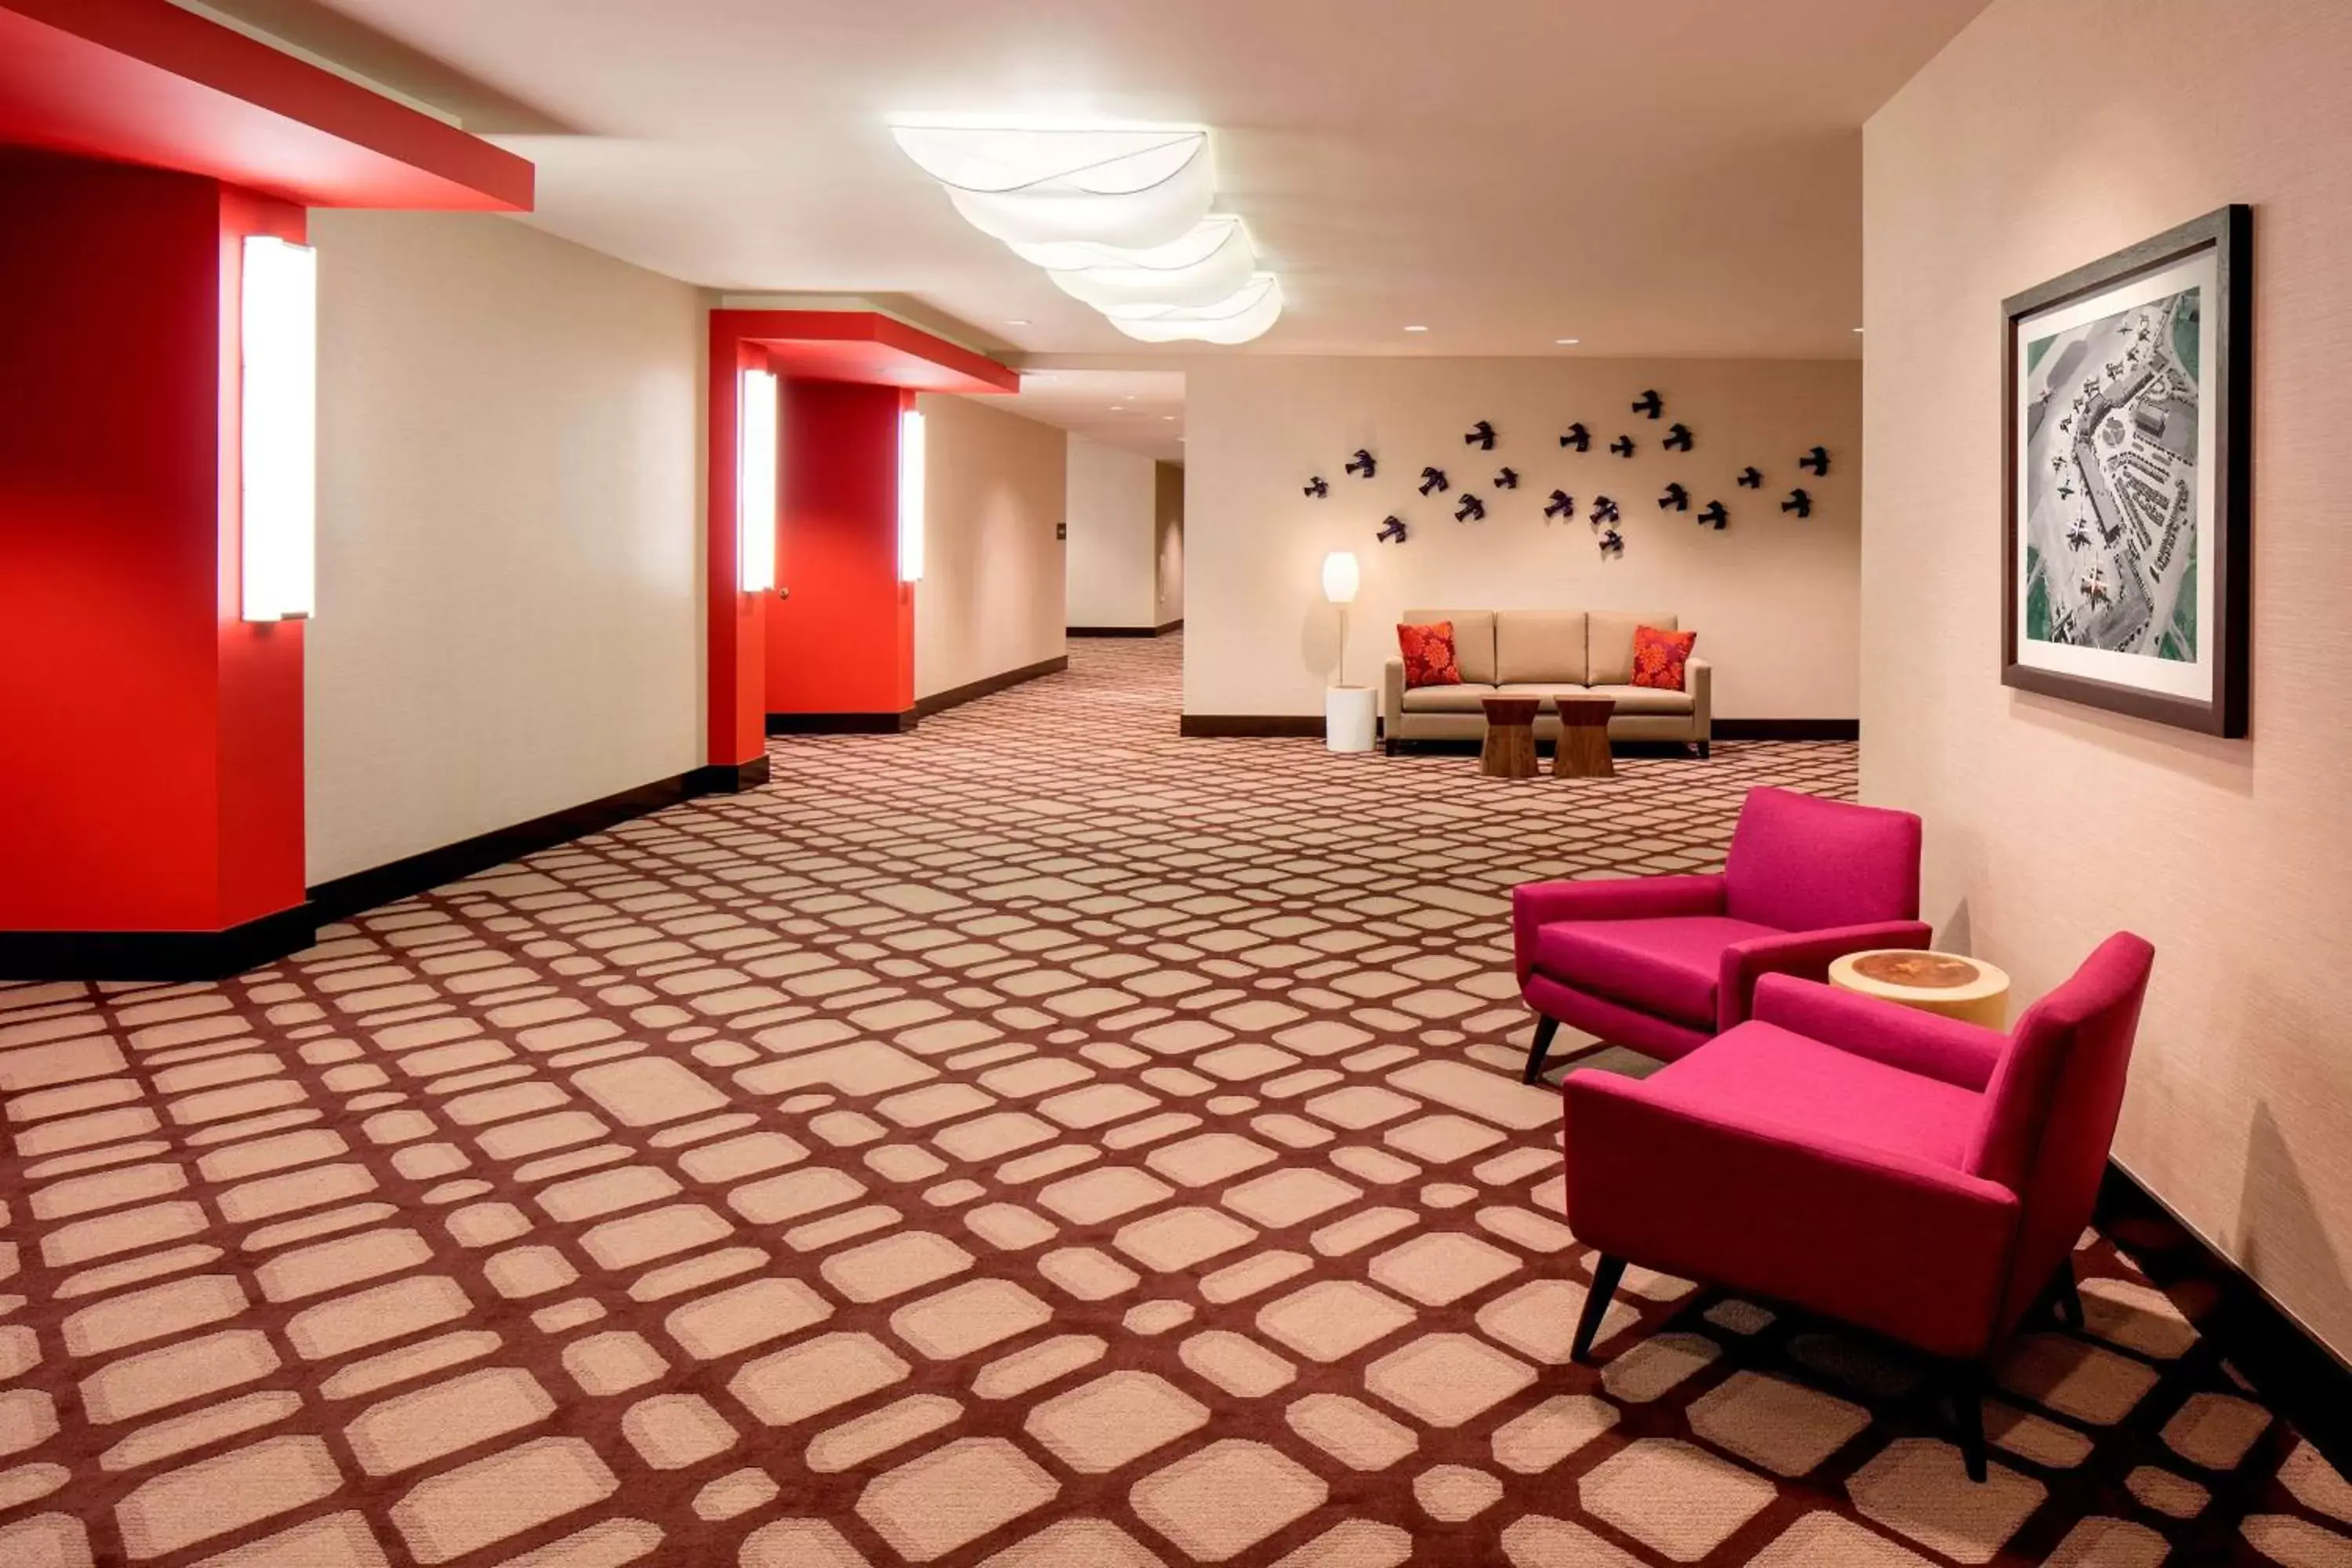 Meeting/conference room, Lobby/Reception in Hilton Garden Inn Downtown Dallas